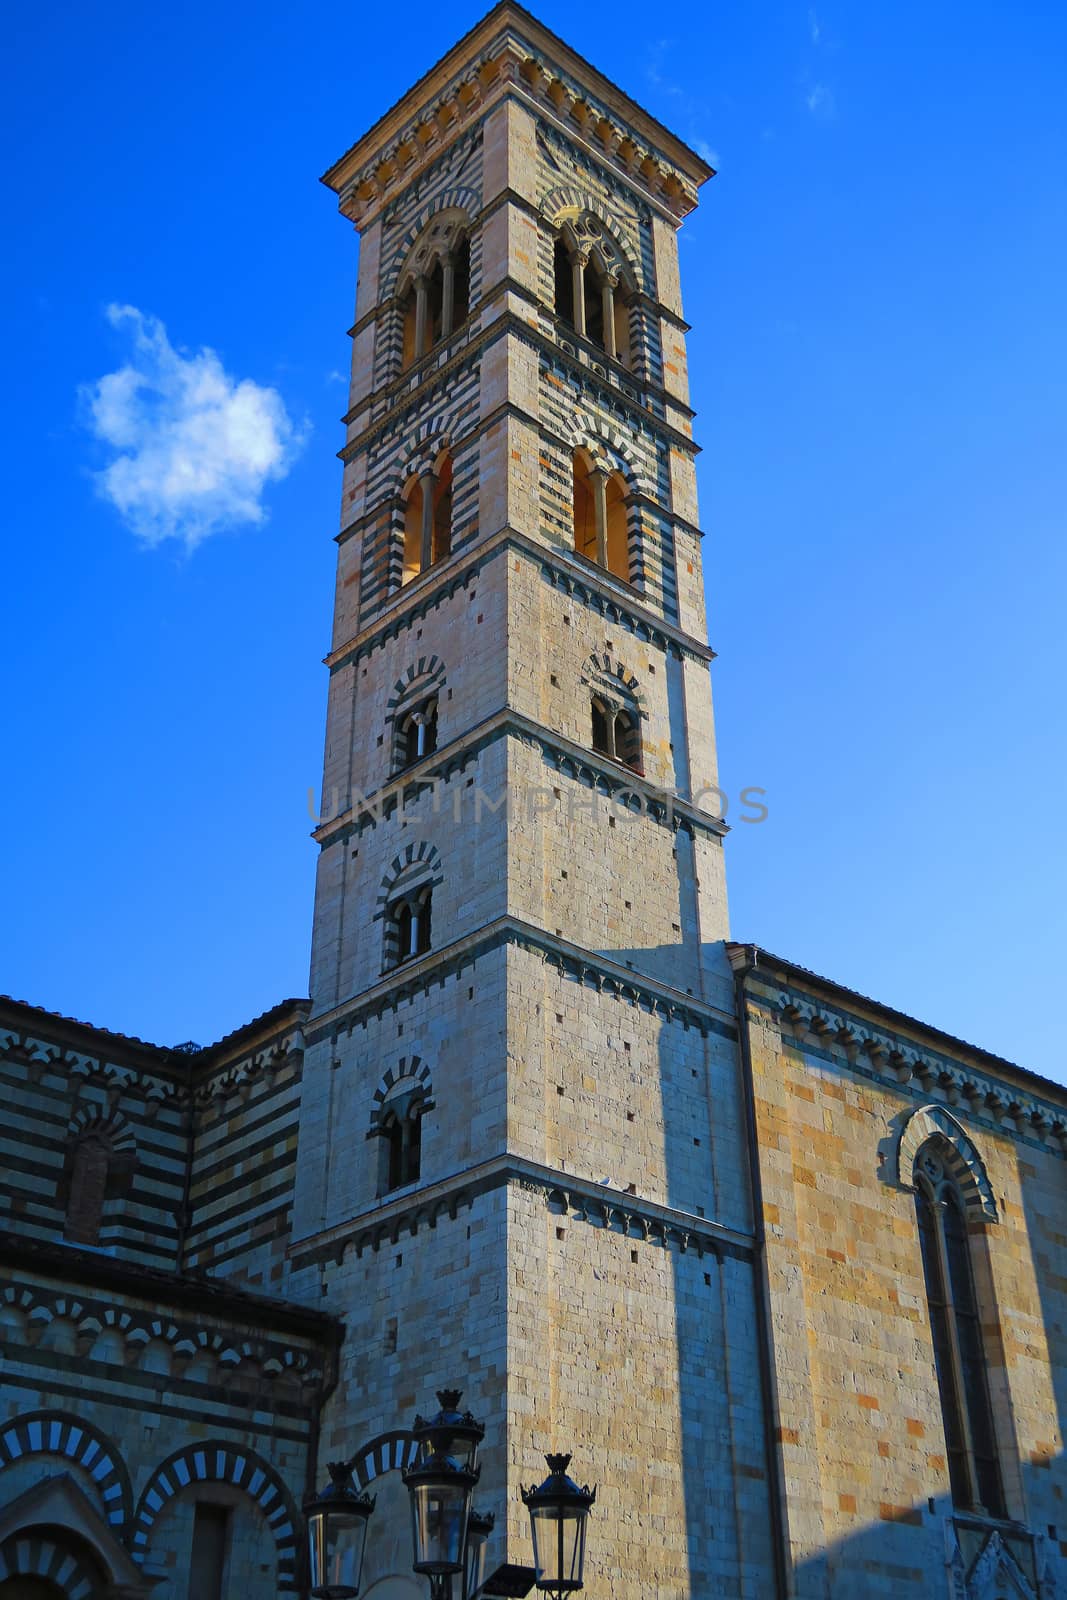 Prato,Italy,11 october 2015.Bell tower of the twelfth century of  Prato Cathedral.The church is dedicated to Saint Stephen, the first Christian martyr. It is one of the most ancient churches in the city, and was already in existence in the 10th century. It was built in several successive stages in the Romanesque style. The church contains a number of notable works of art, in particular fine sculpture. During the 14th century the cathedral acquired an important relic, the Sacra Cintola or Belt of the Holy Virgin.